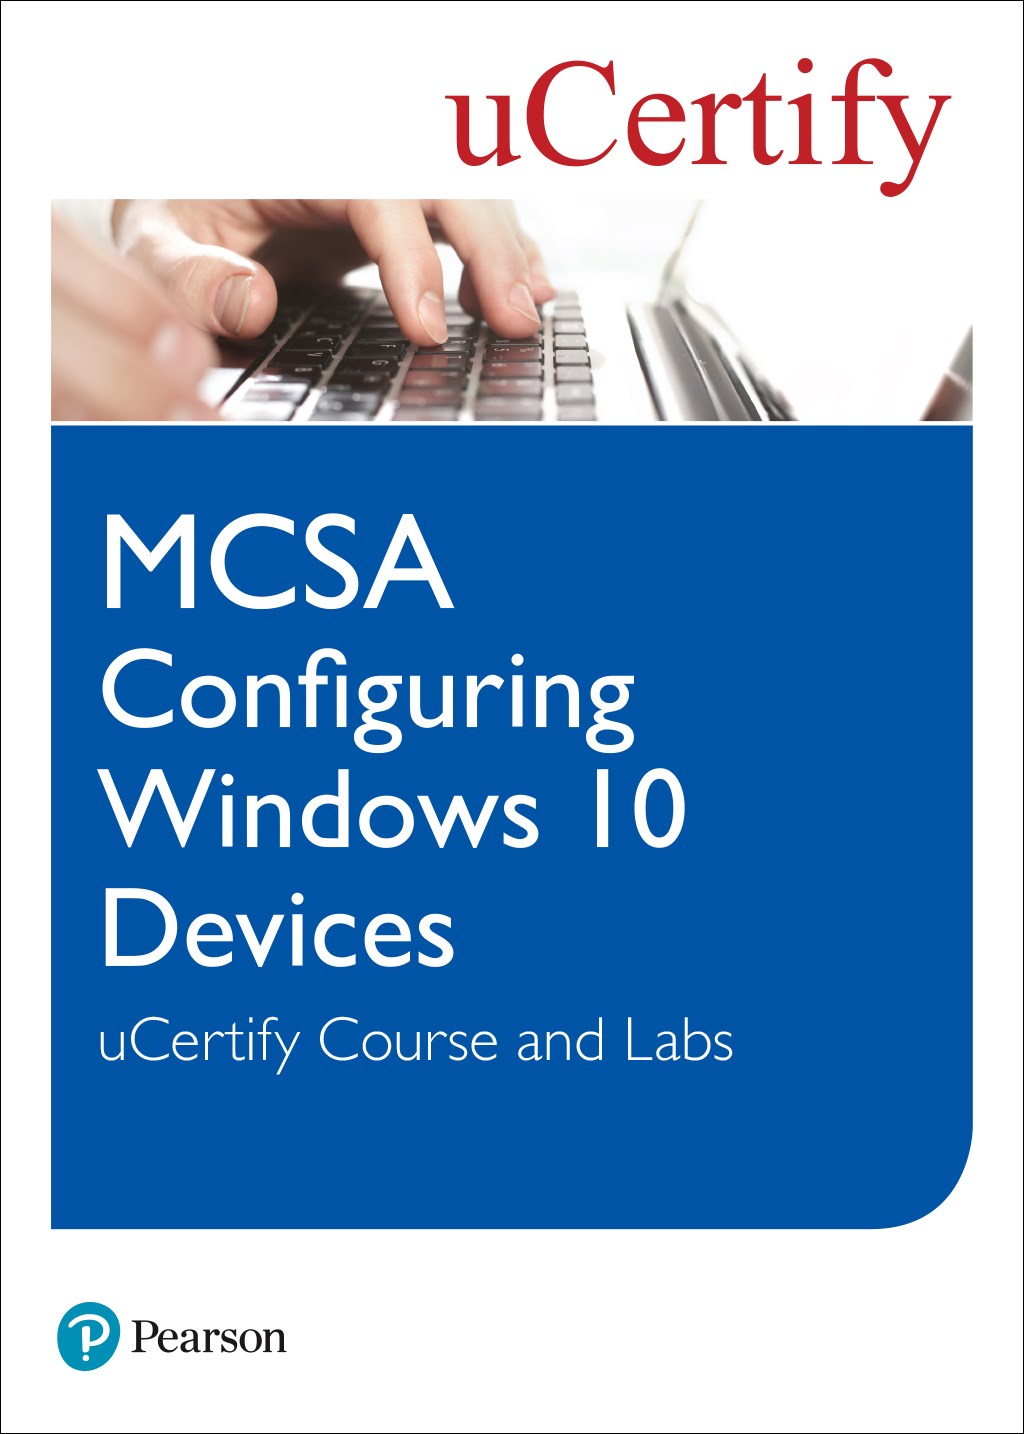 MCSA Configuring Windows 10 Devices uCertify Course and Labs Access Code Card